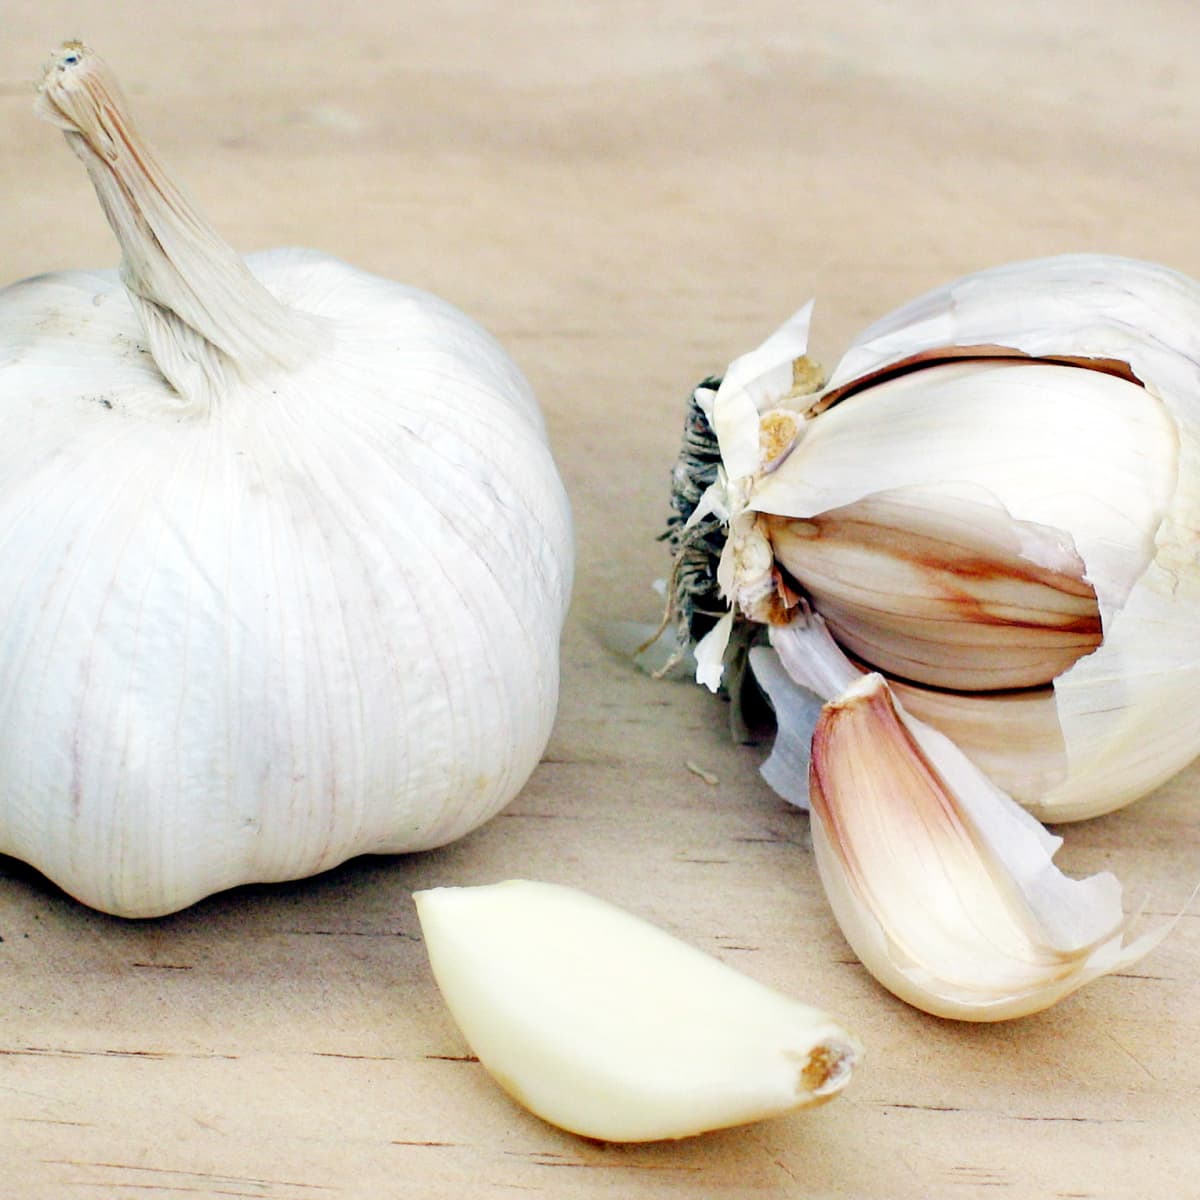 Why Do My Fingernails Smell Like Garlic? - HubPages